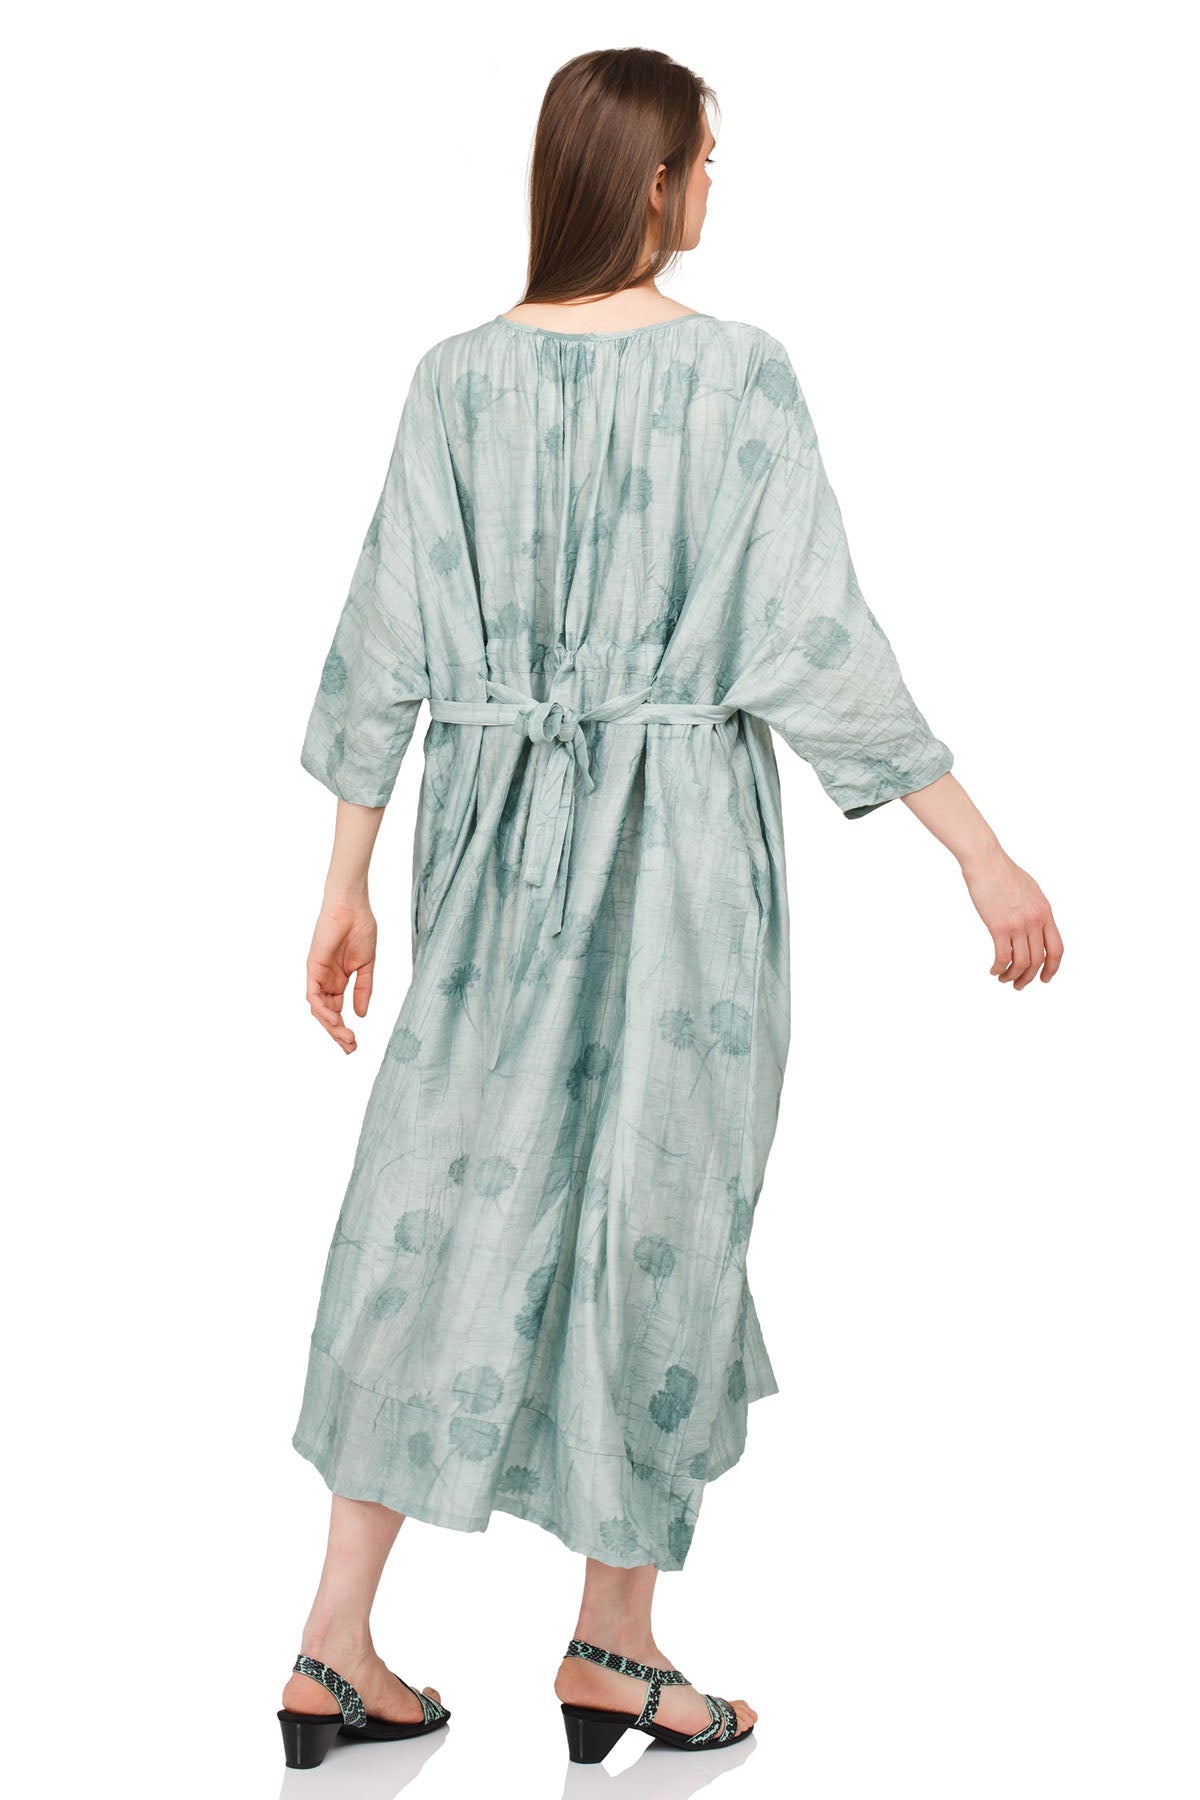 Chic & Simple Nelly Dress - Turquoise